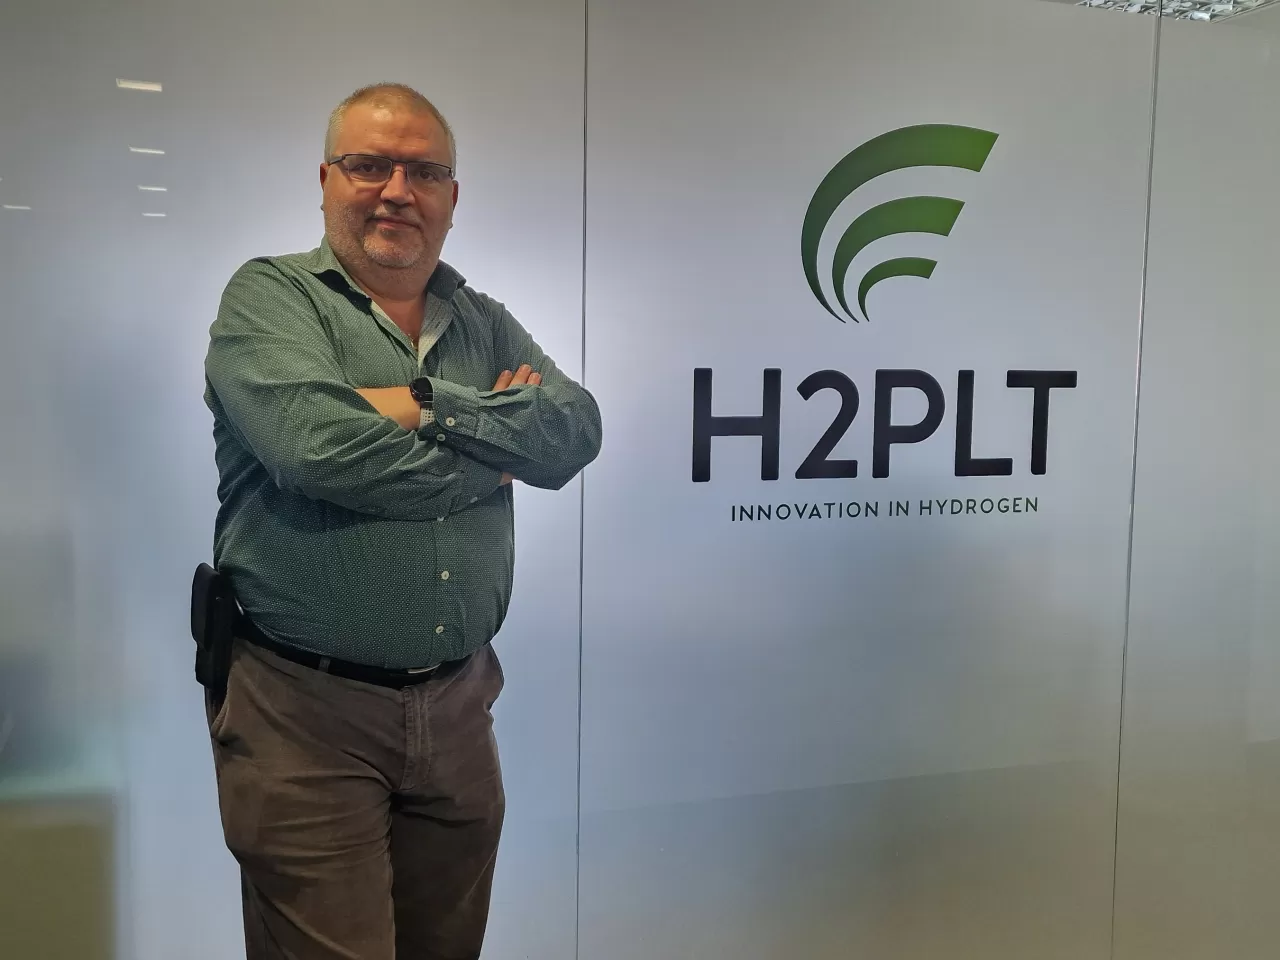 Sisco Sapena, CEO and founder of H2PLT img#1